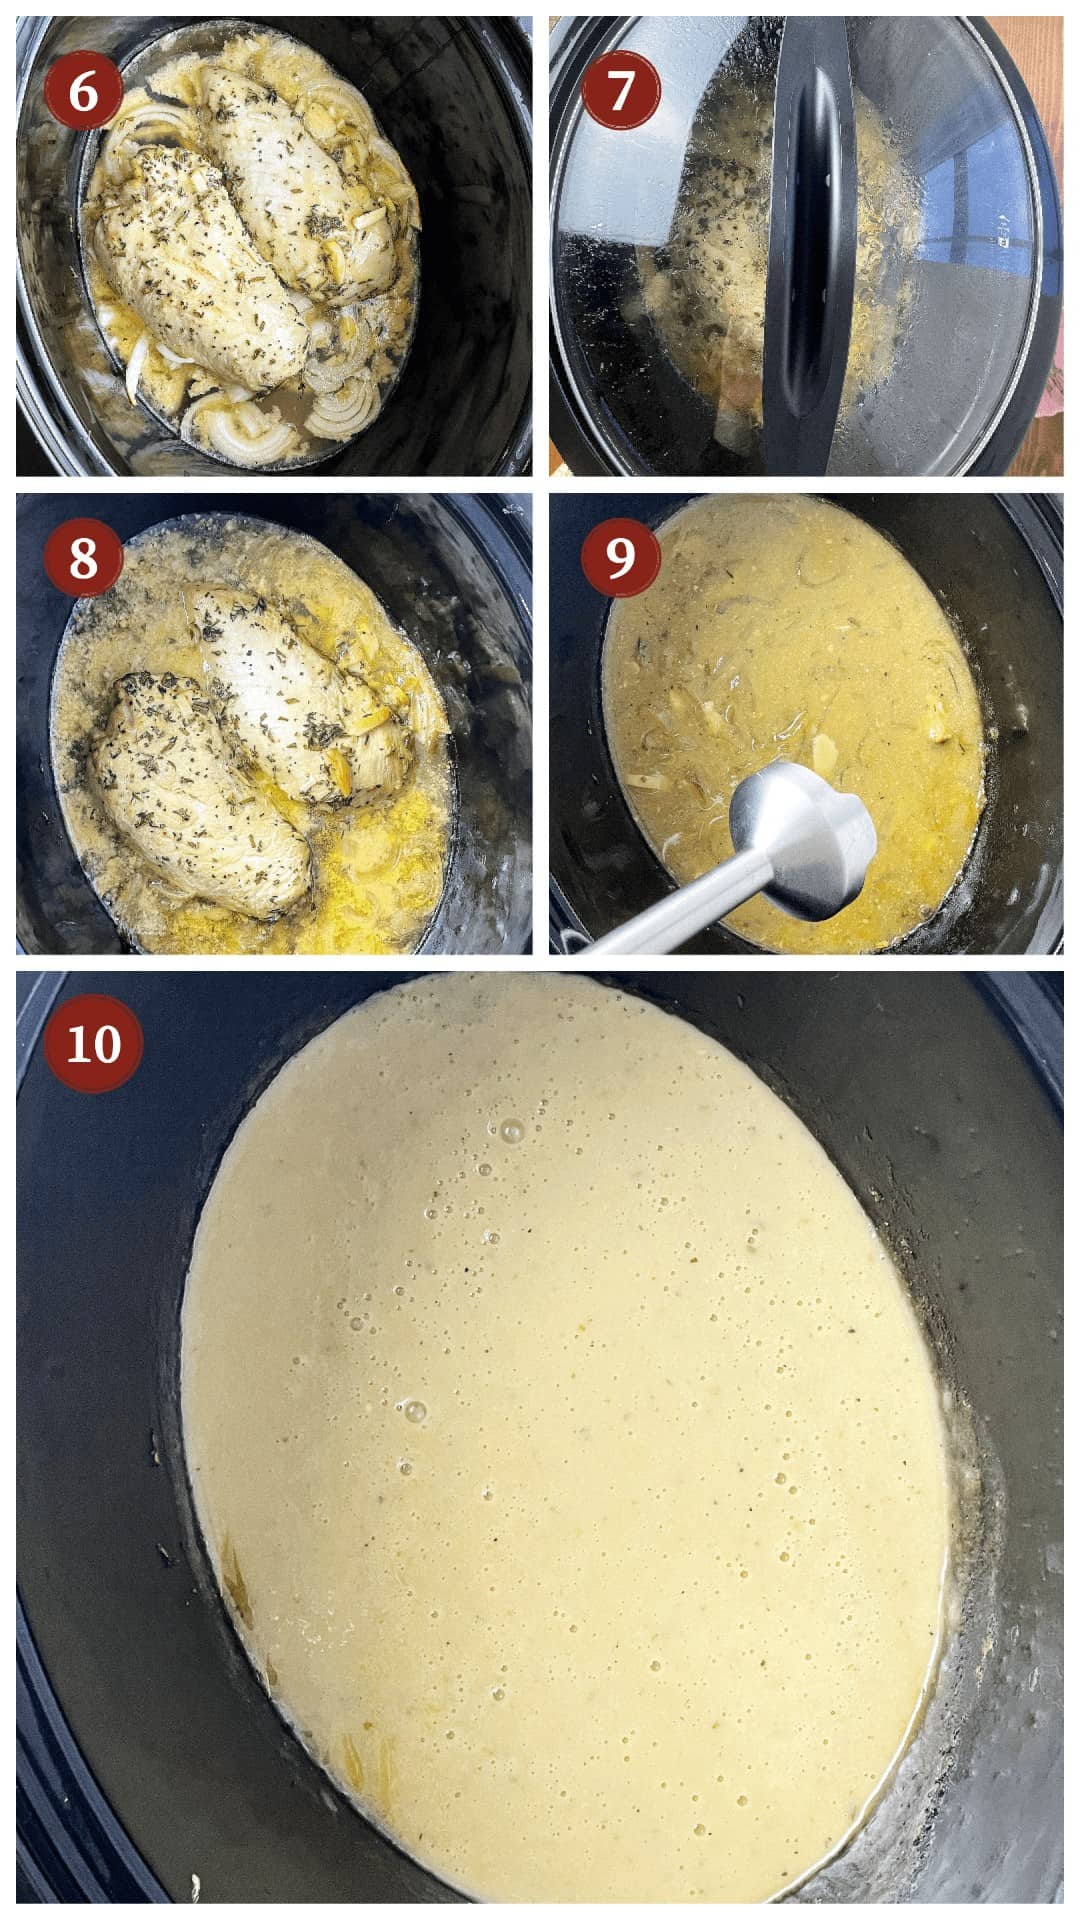 A collage of images showing how to cook crockpot turkey tenderloins, steps 6-10.